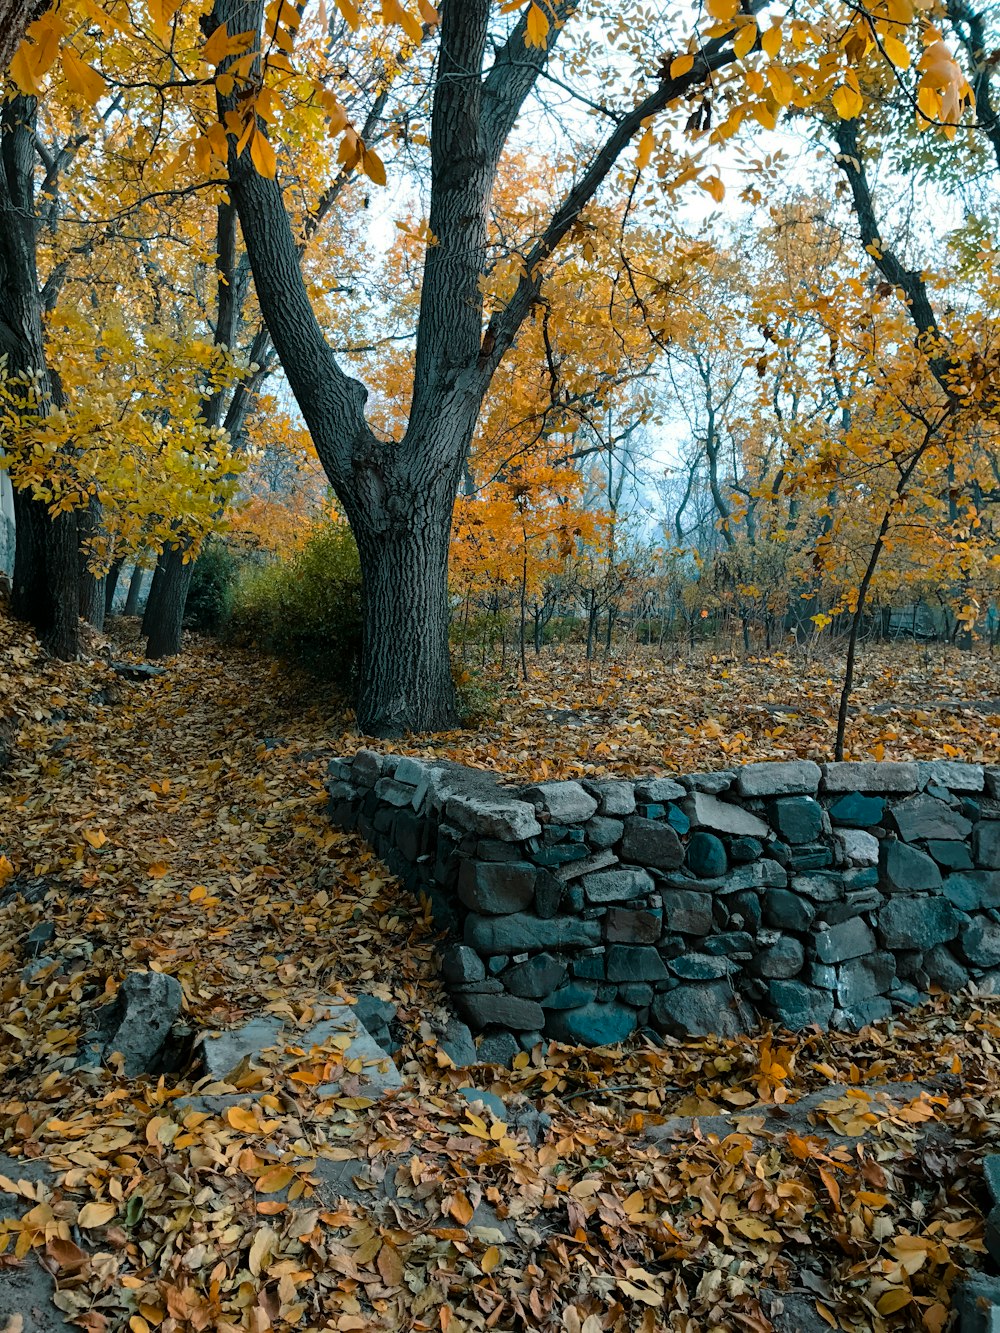 a stone bench sitting under a tree filled with leaves